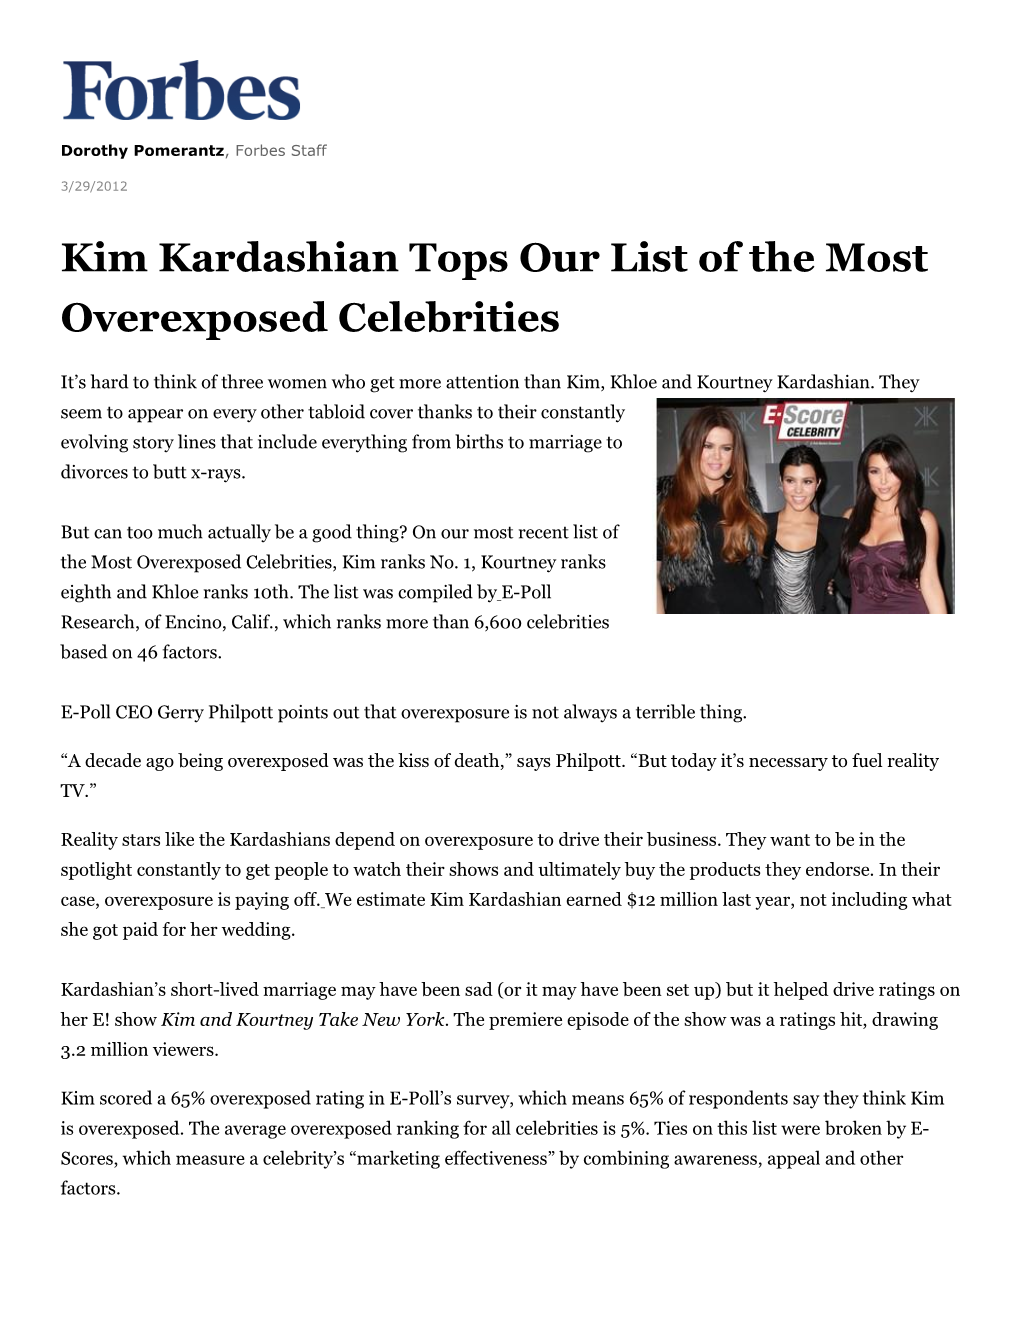 Kim Kardashian Tops Our List of the Most Overexposed Celebrities